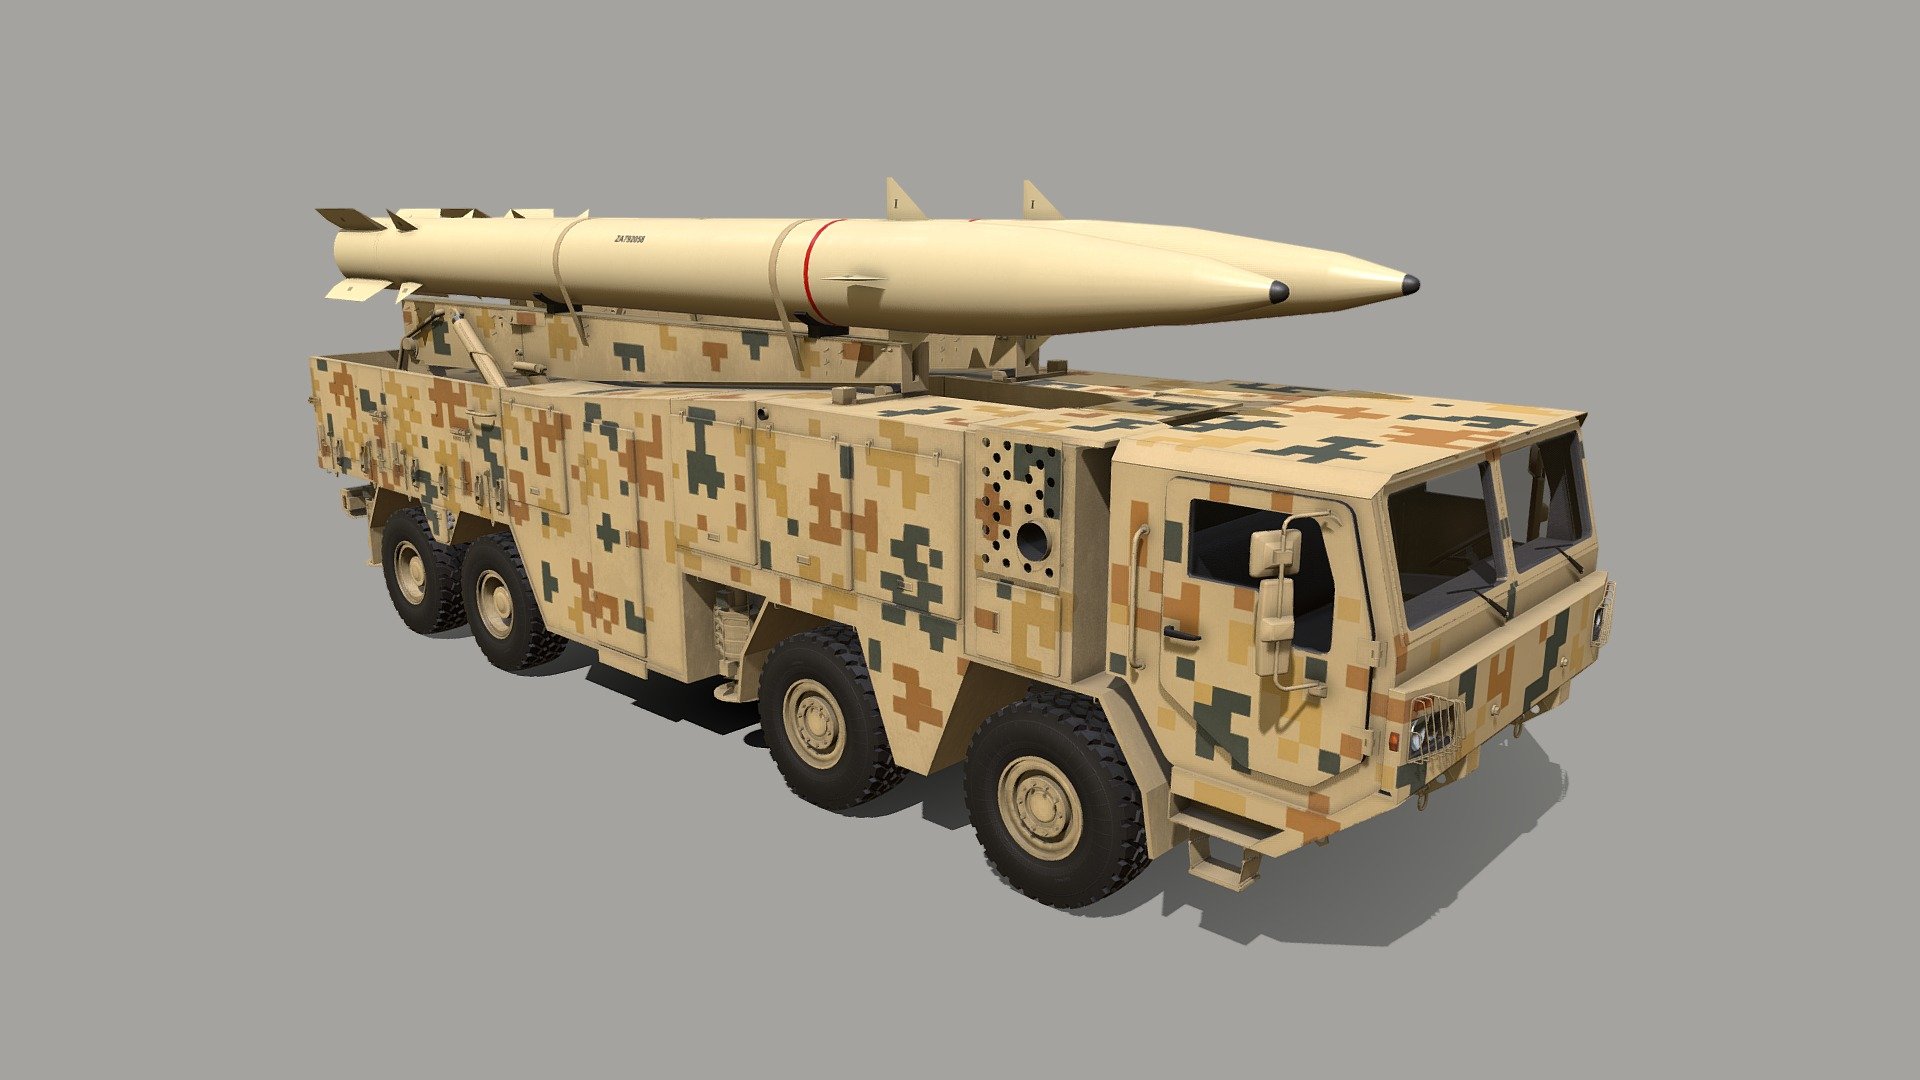 The Zolfaghar  missile is an Iranian road-mobile single-stage, solid-propelled SRBM named after the sword of Ali ibn Abi Talib Zolfaghar. It is believed to be derived from the Fateh-110 SRBM family (possibly the Fateh-313 missile). The Aerospace Industries Organization unveiled their new weapon in 2016 which entered service in 2017 as a longer range version of the Fateh-110 SRBM 3d model